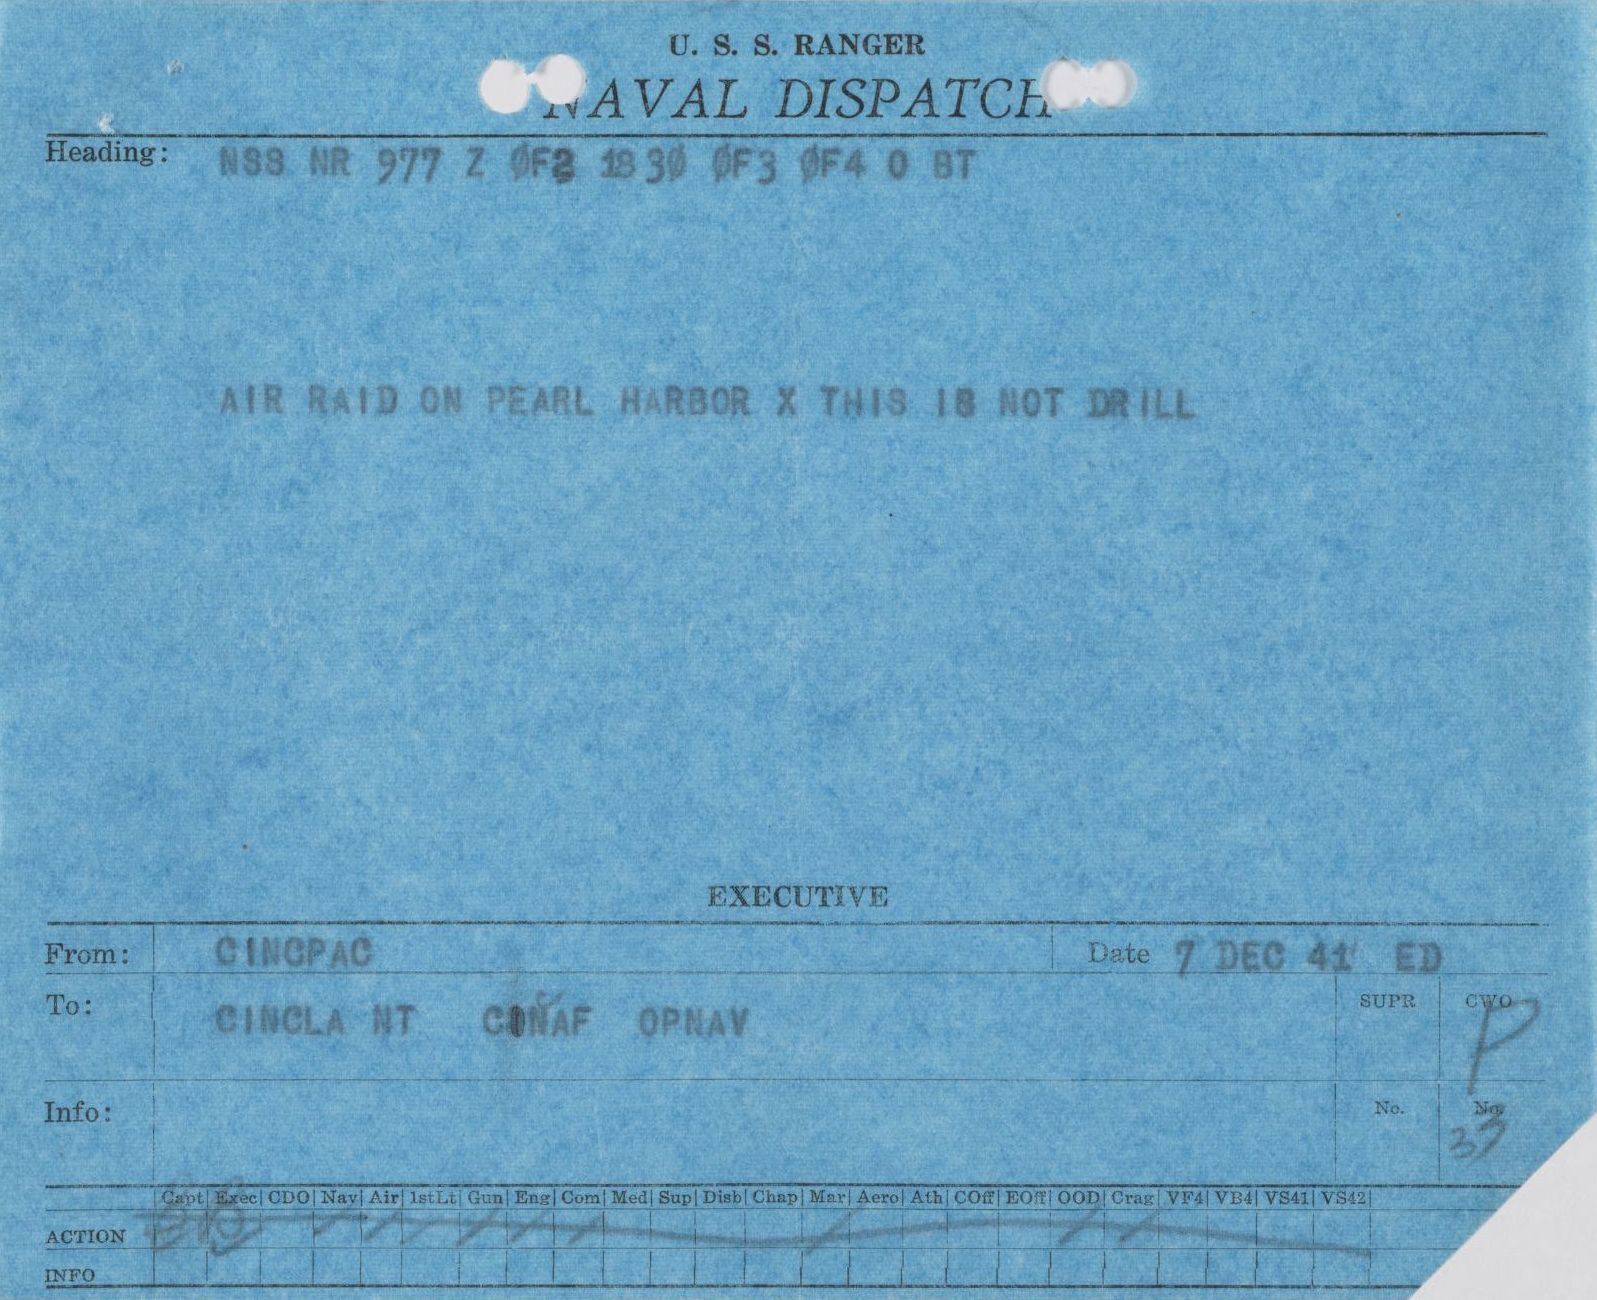 'AIR RAID ON PEARL HARBOR X THIS IS NOT DRILL' radio message received by USS Ranger, 7 Dec 1941. Ranger was in the Atlantic approaching Norfolk, Virginia at the time.